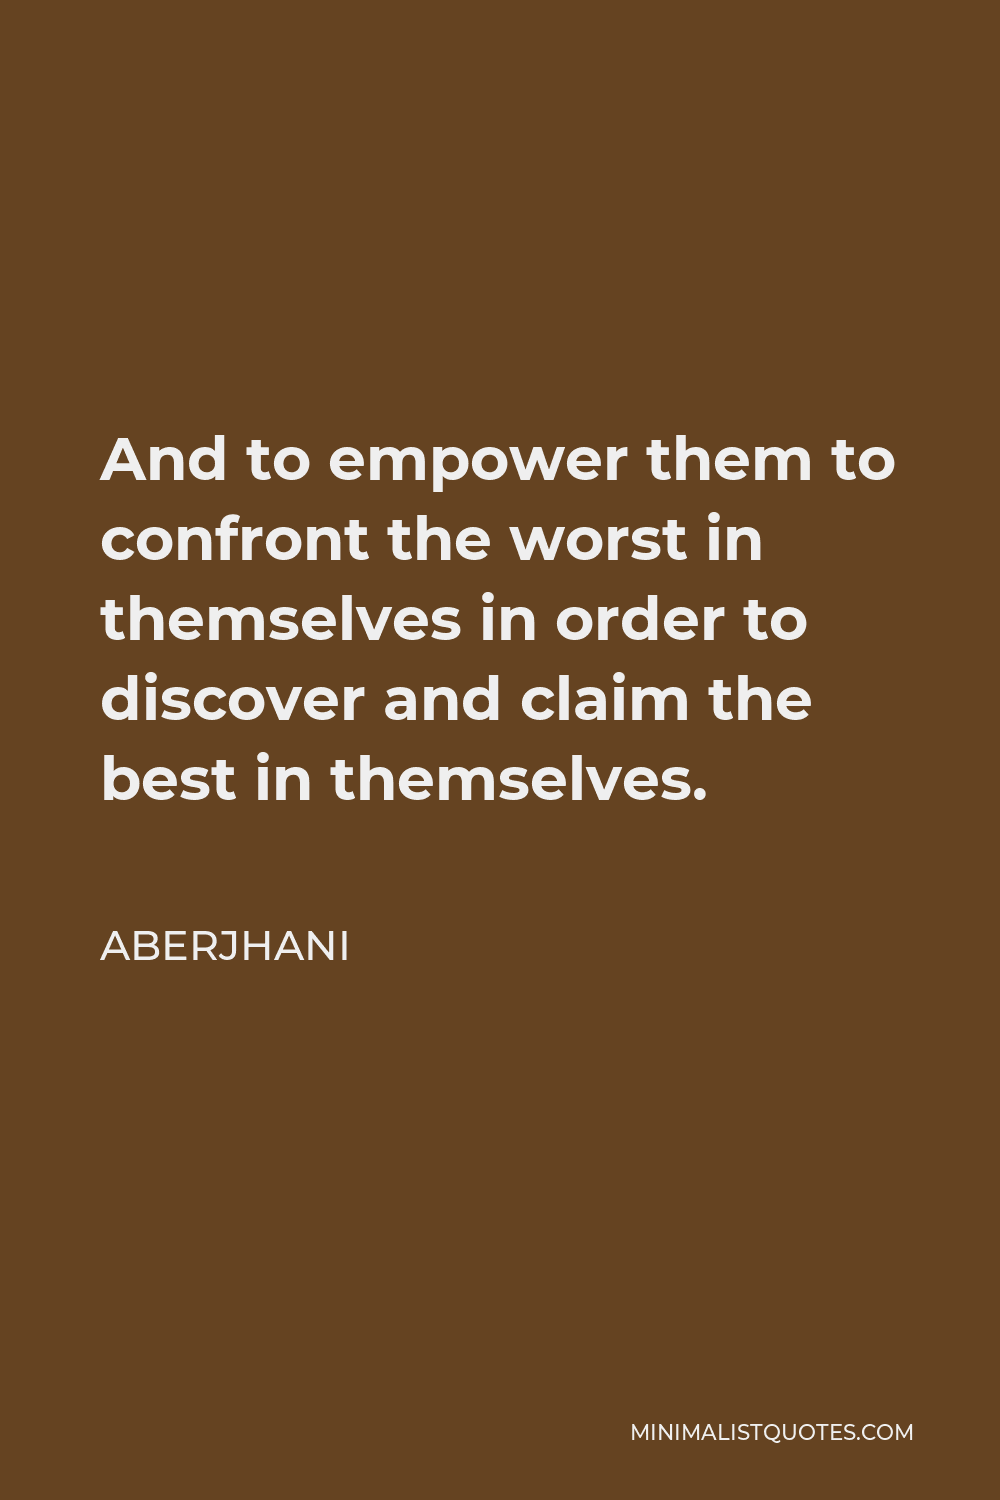 Aberjhani Quote - And to empower them to confront the worst in themselves in order to discover and claim the best in themselves.